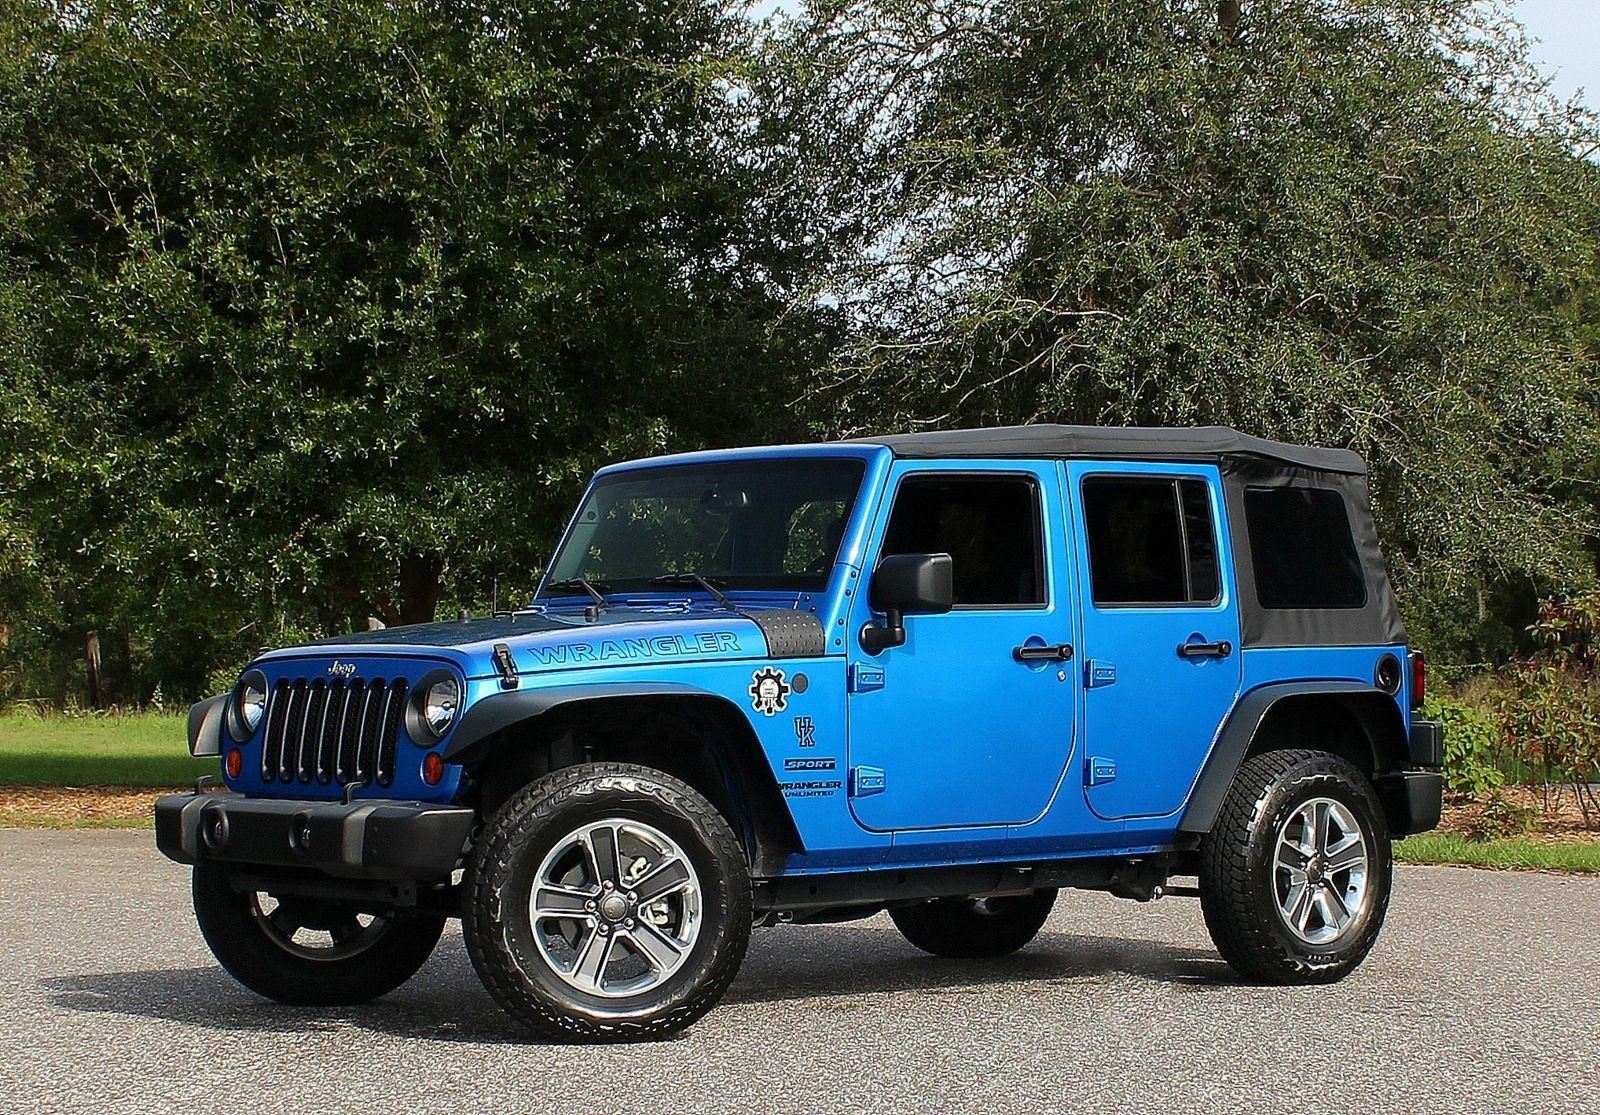 Bright Blue 2016 Jeep Wrangler Unlimited outdoors in forest